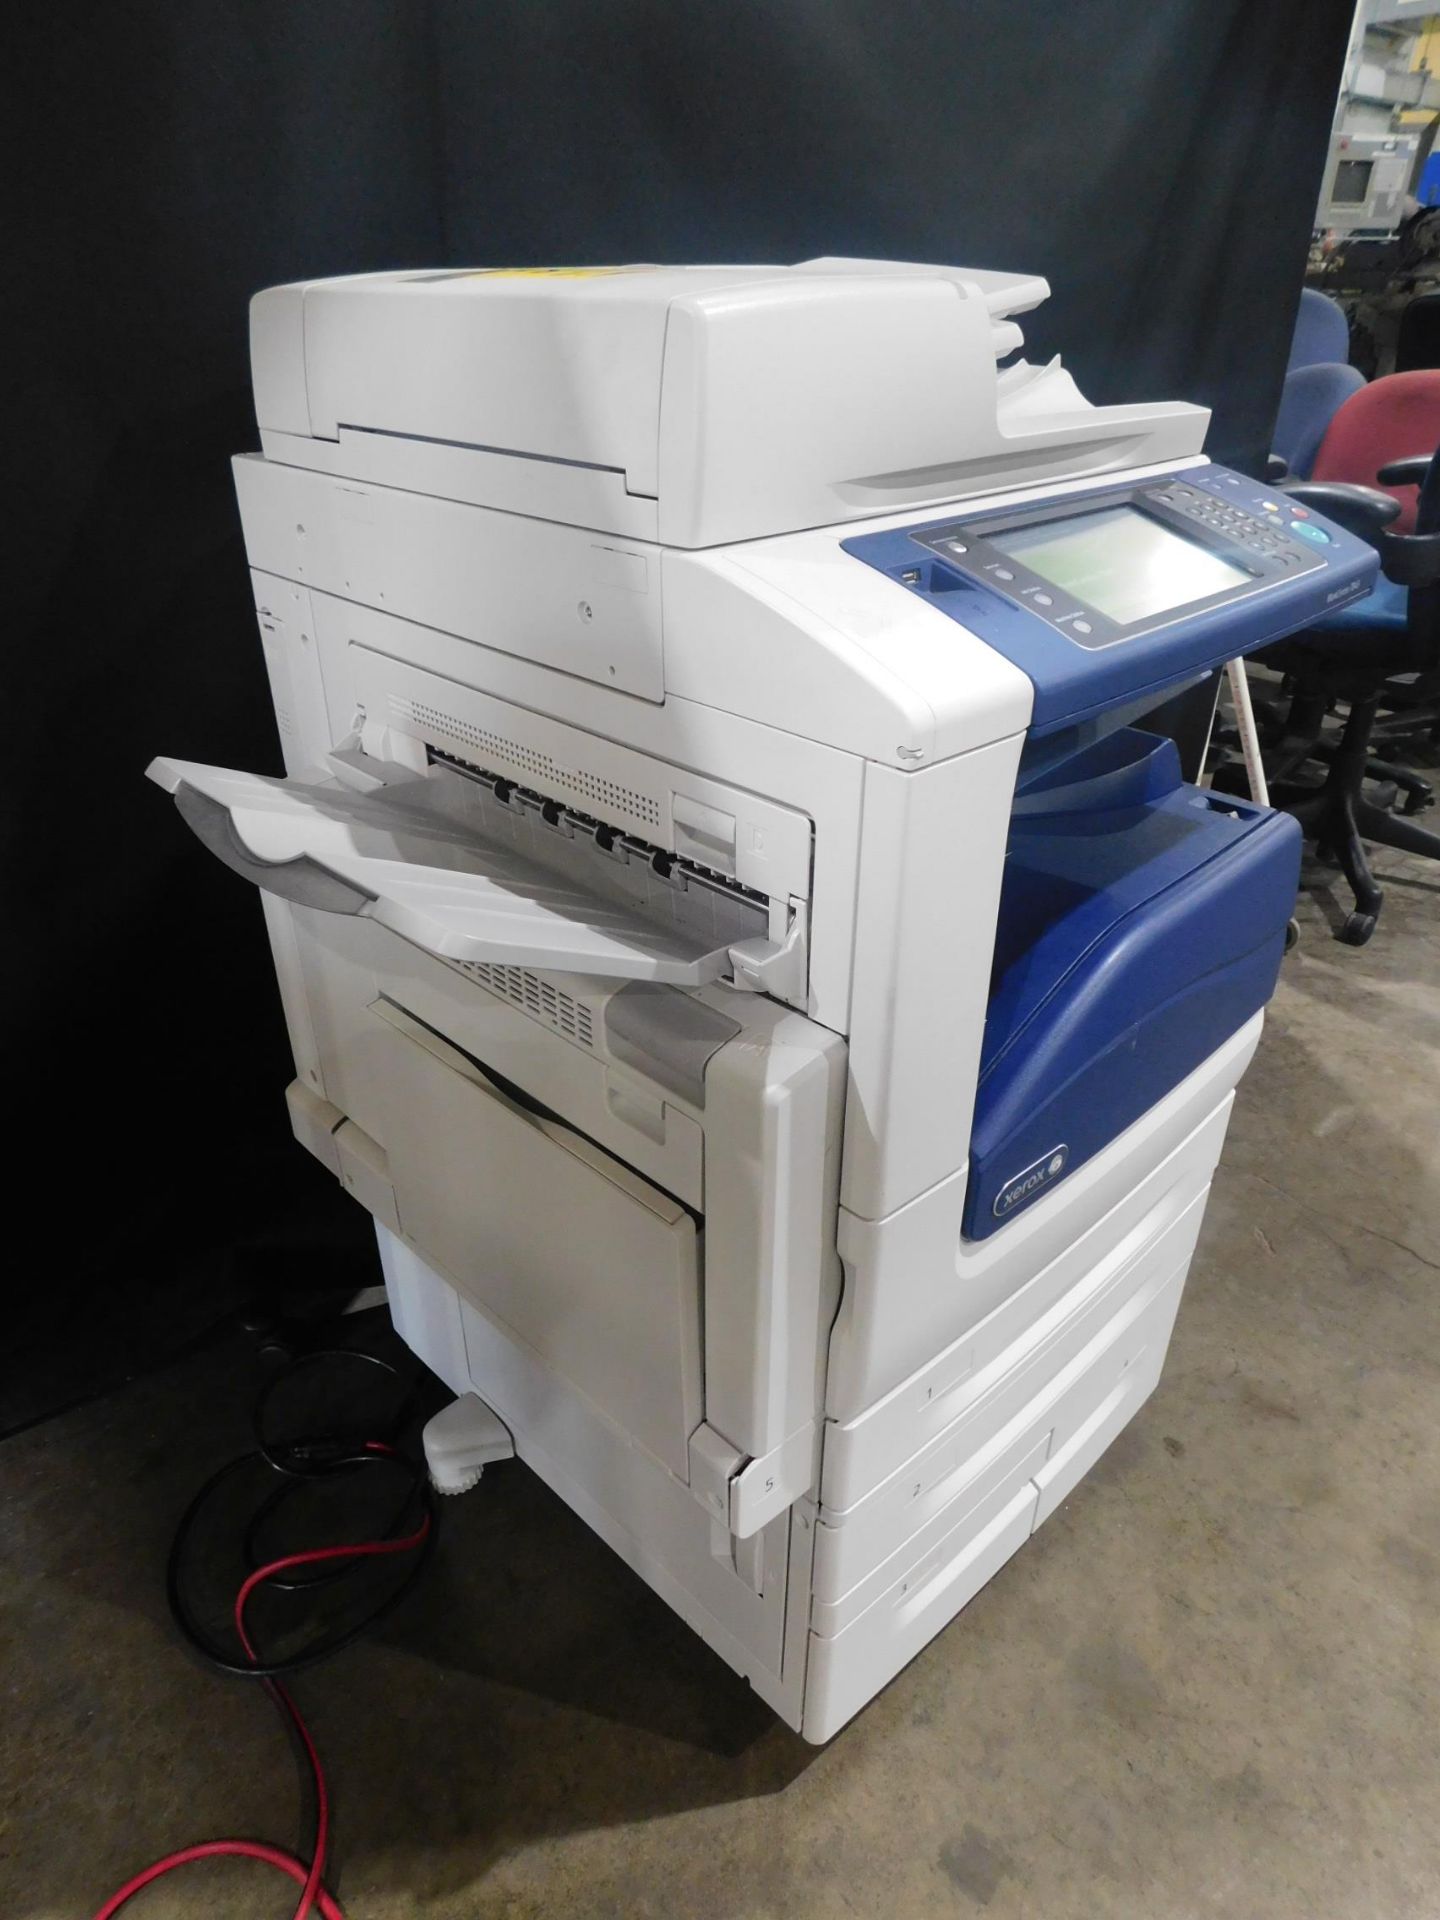 Xerox Work Centre 7845 Multifunction Color Copier/Printer, SN MX4734146, Total Impressions: 376,162, - Image 4 of 10